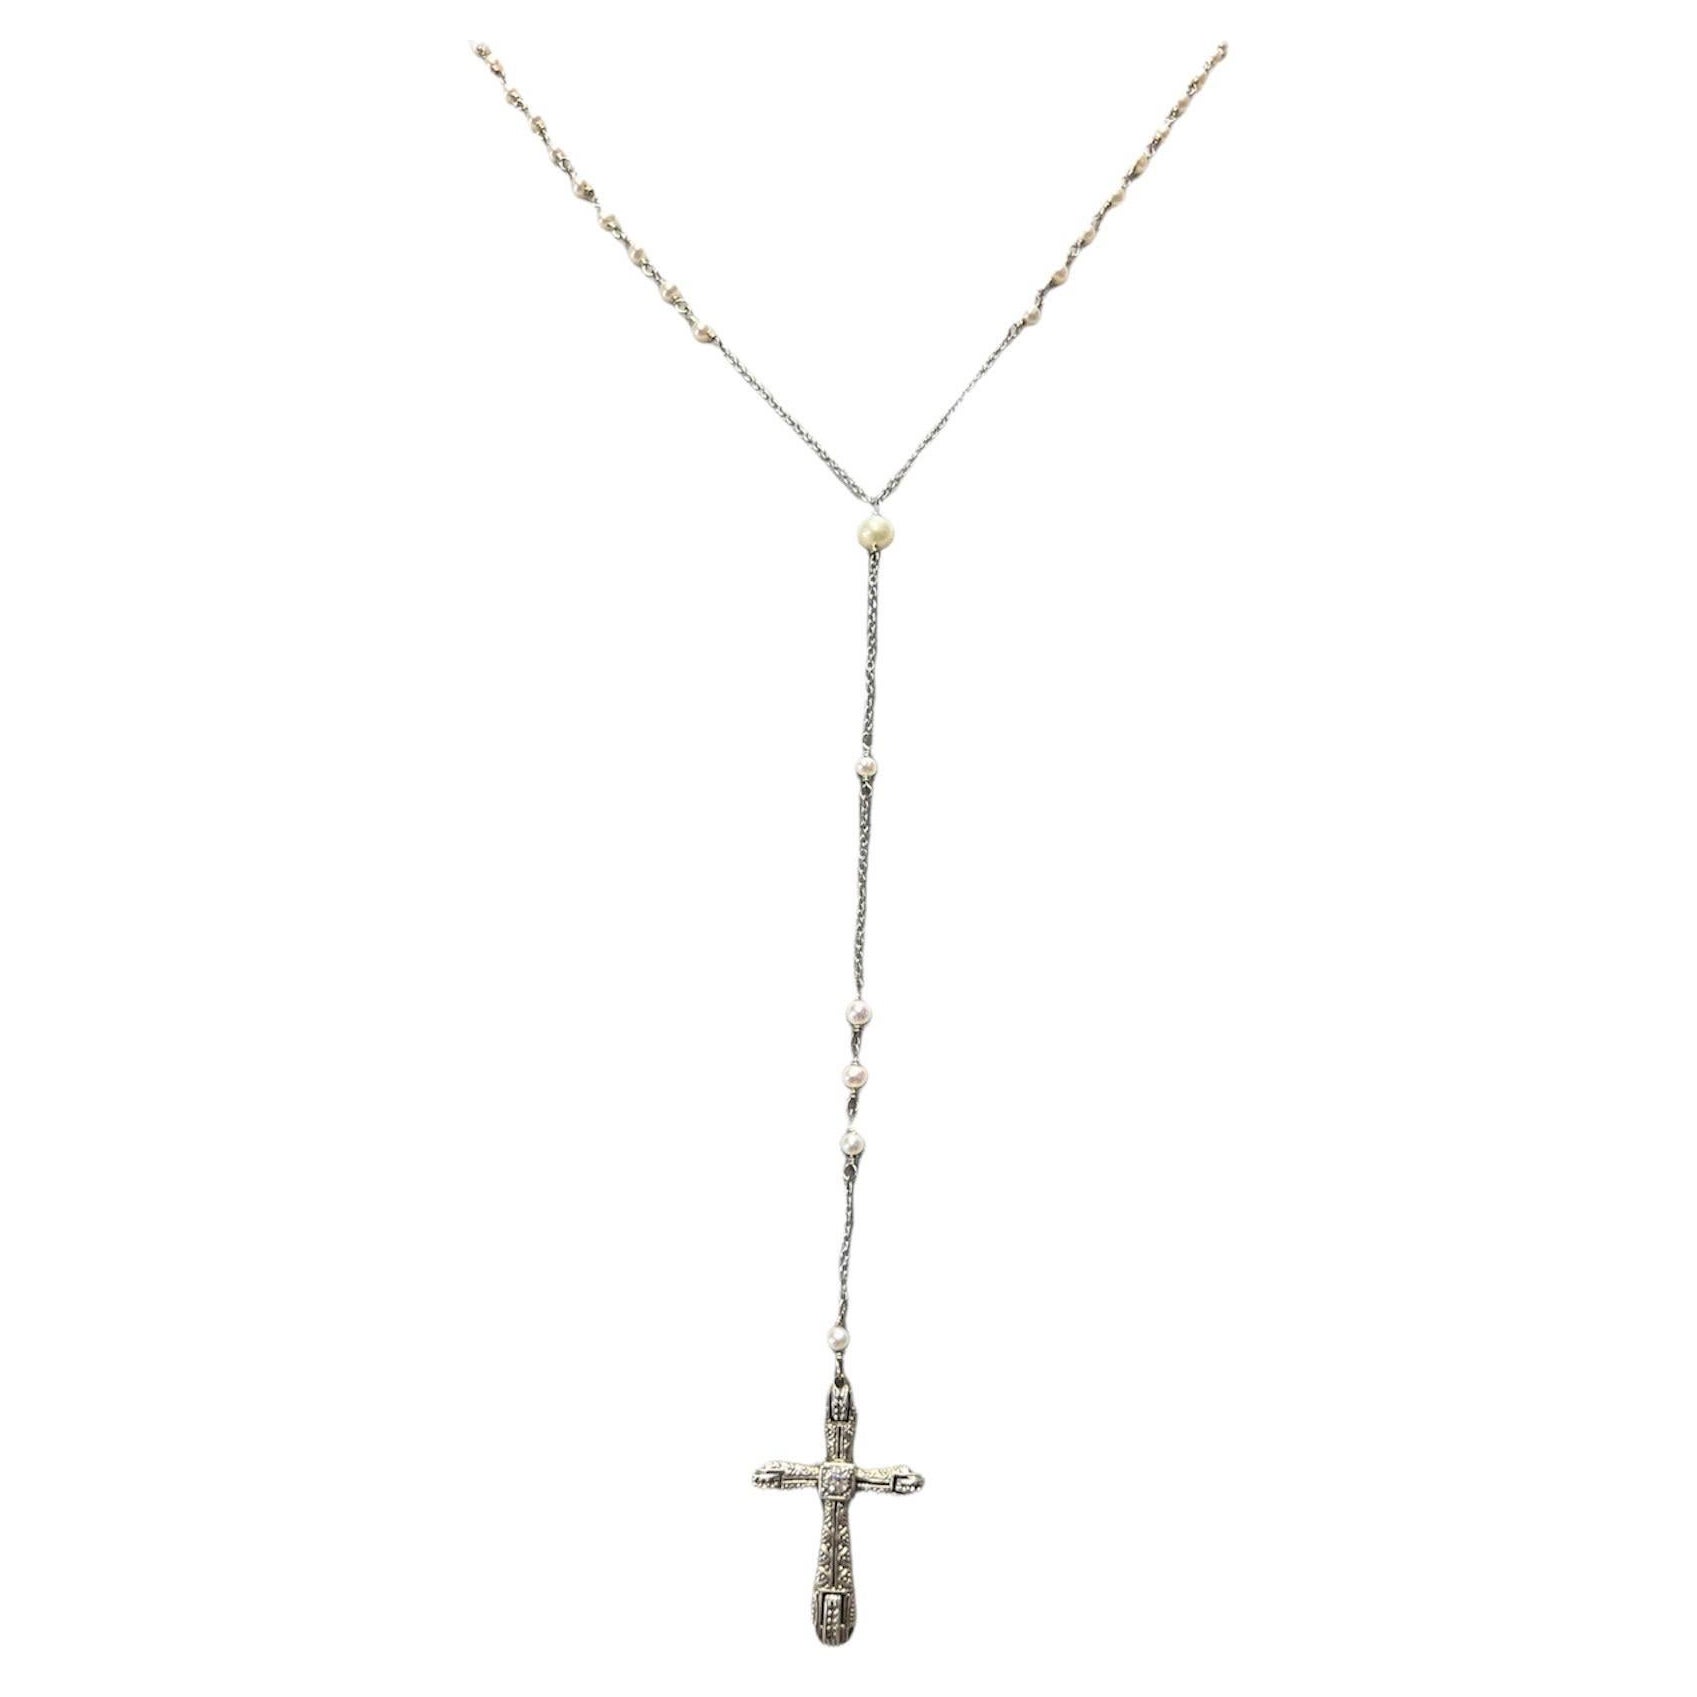 Art Deco 14K White Gold Pearl and Diamond Cross Rosary Necklace